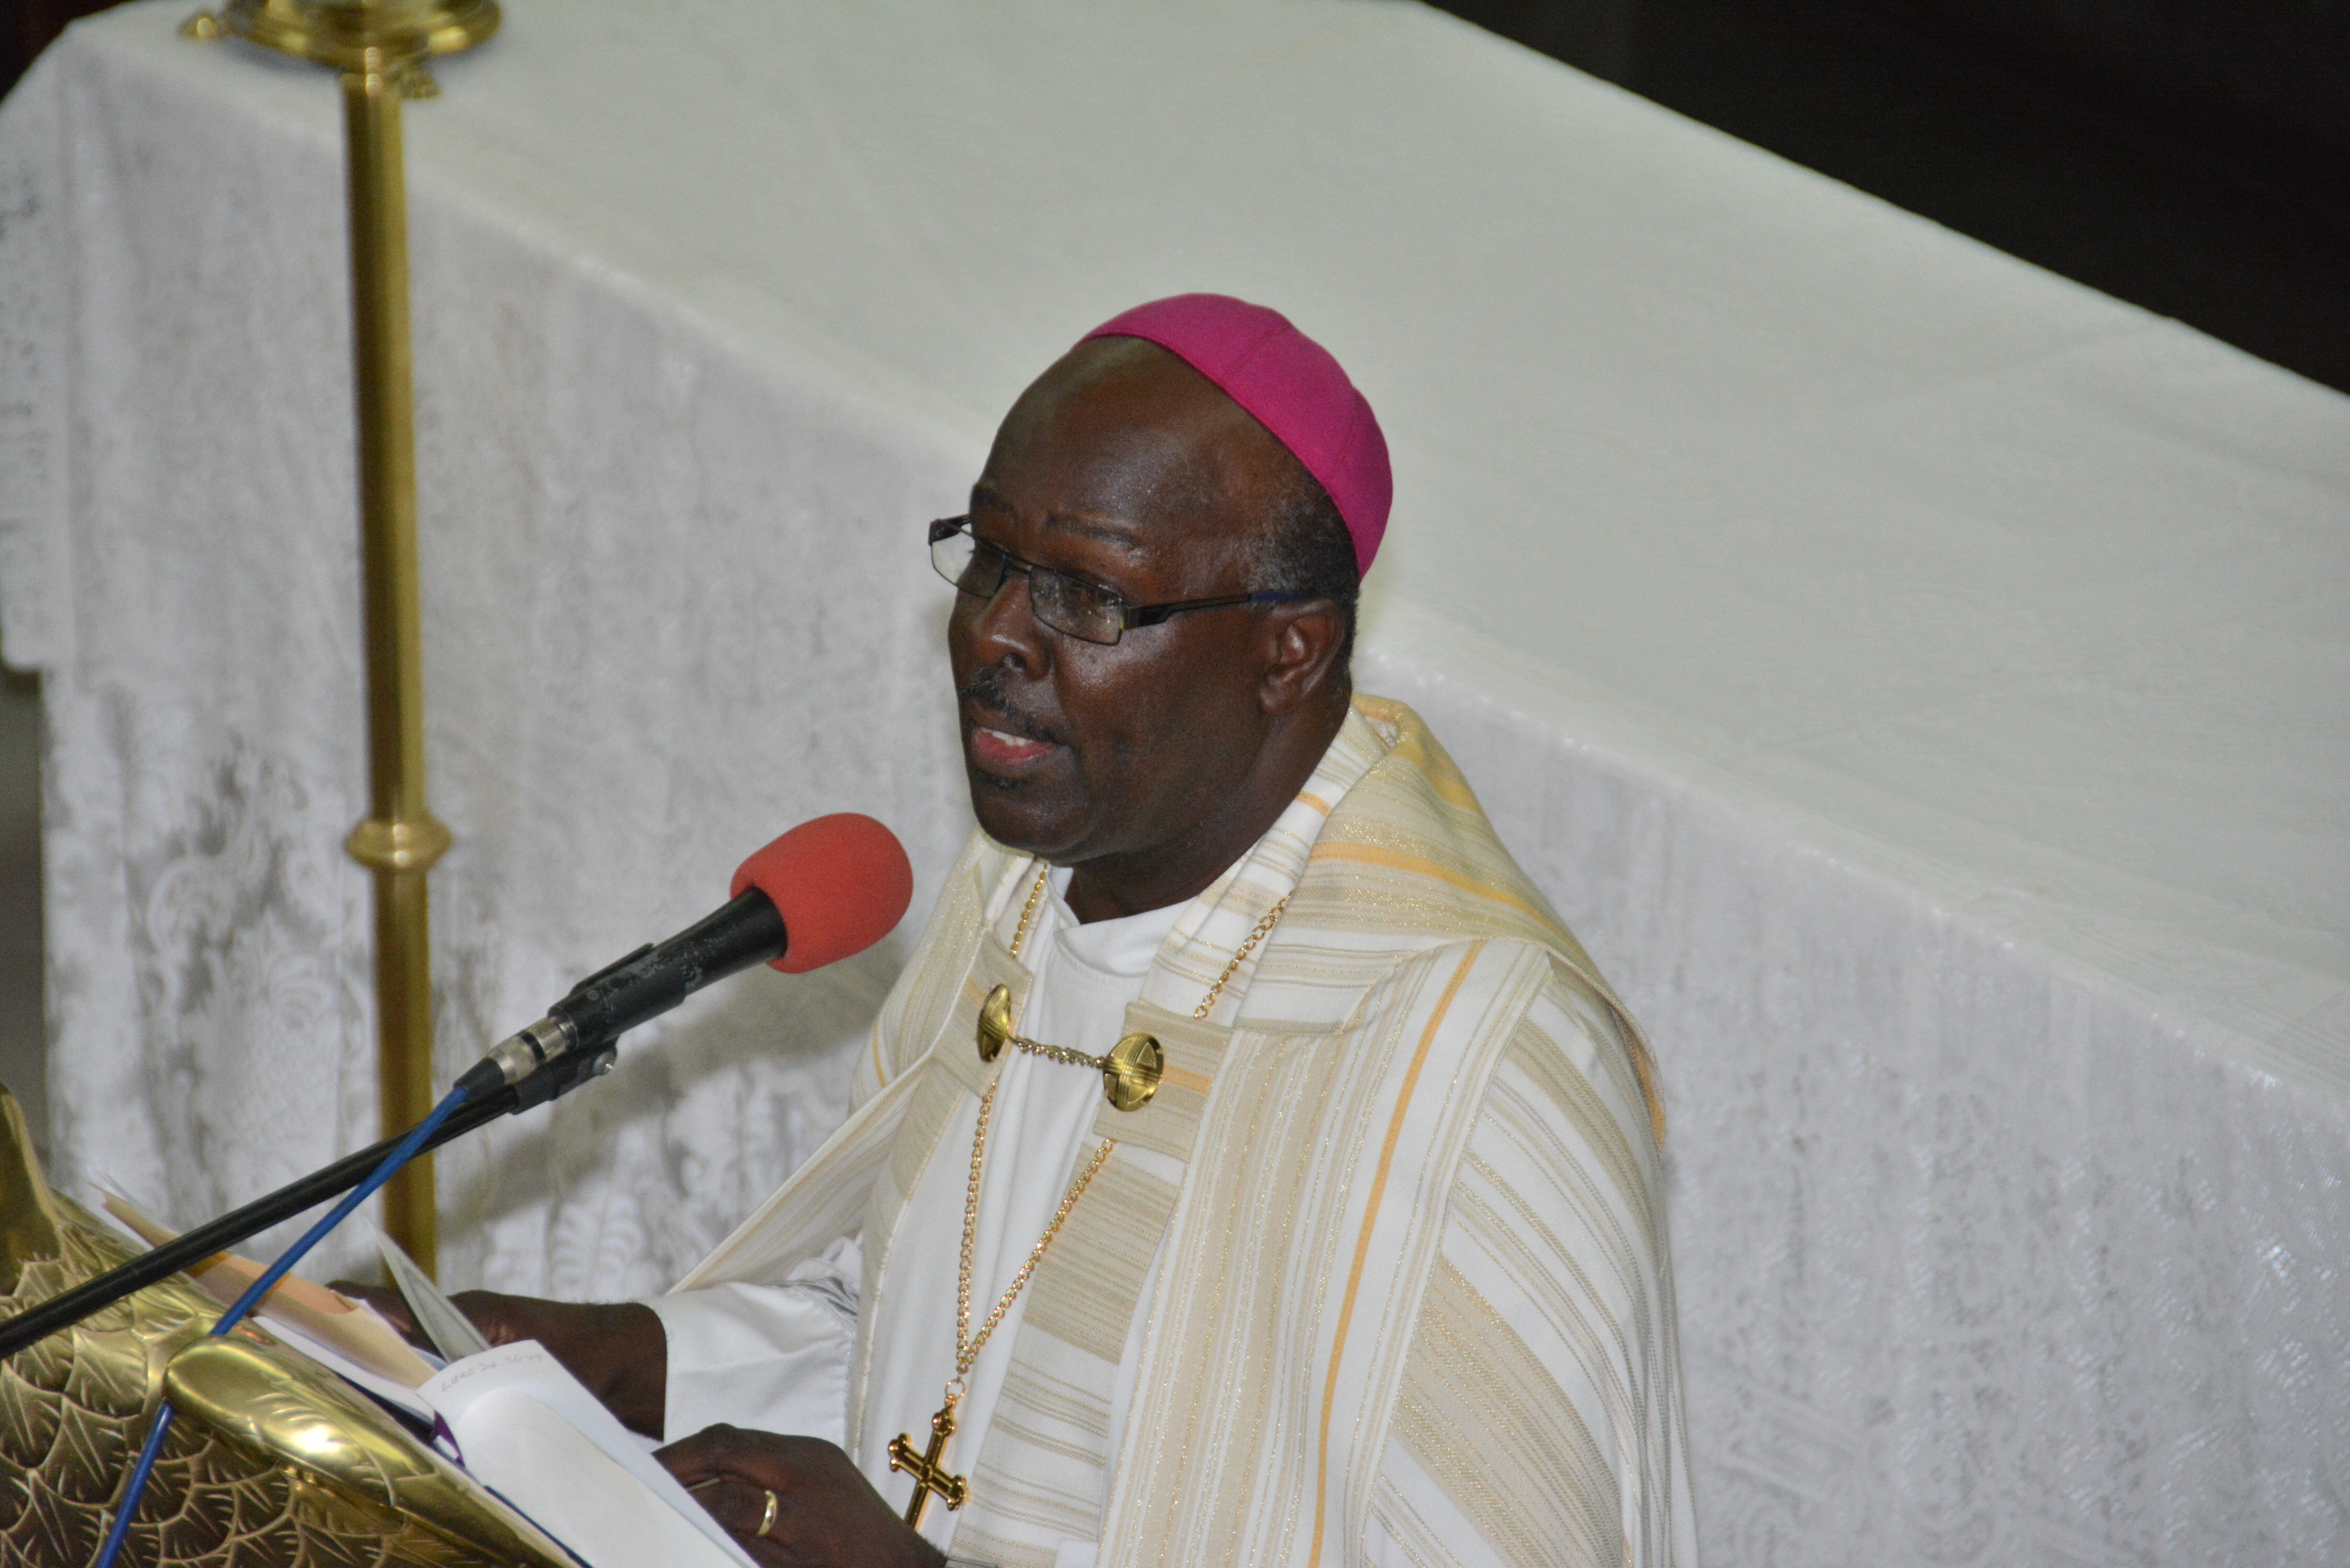 Sermon delivered by the Rt. Rev. Leon Golding 	Suffragan Bishop of Montego Bay on the Second Day of the 145th Synod  of the Diocese of Jamaica & The Cayman Islands Wednesday, April 8, 2015